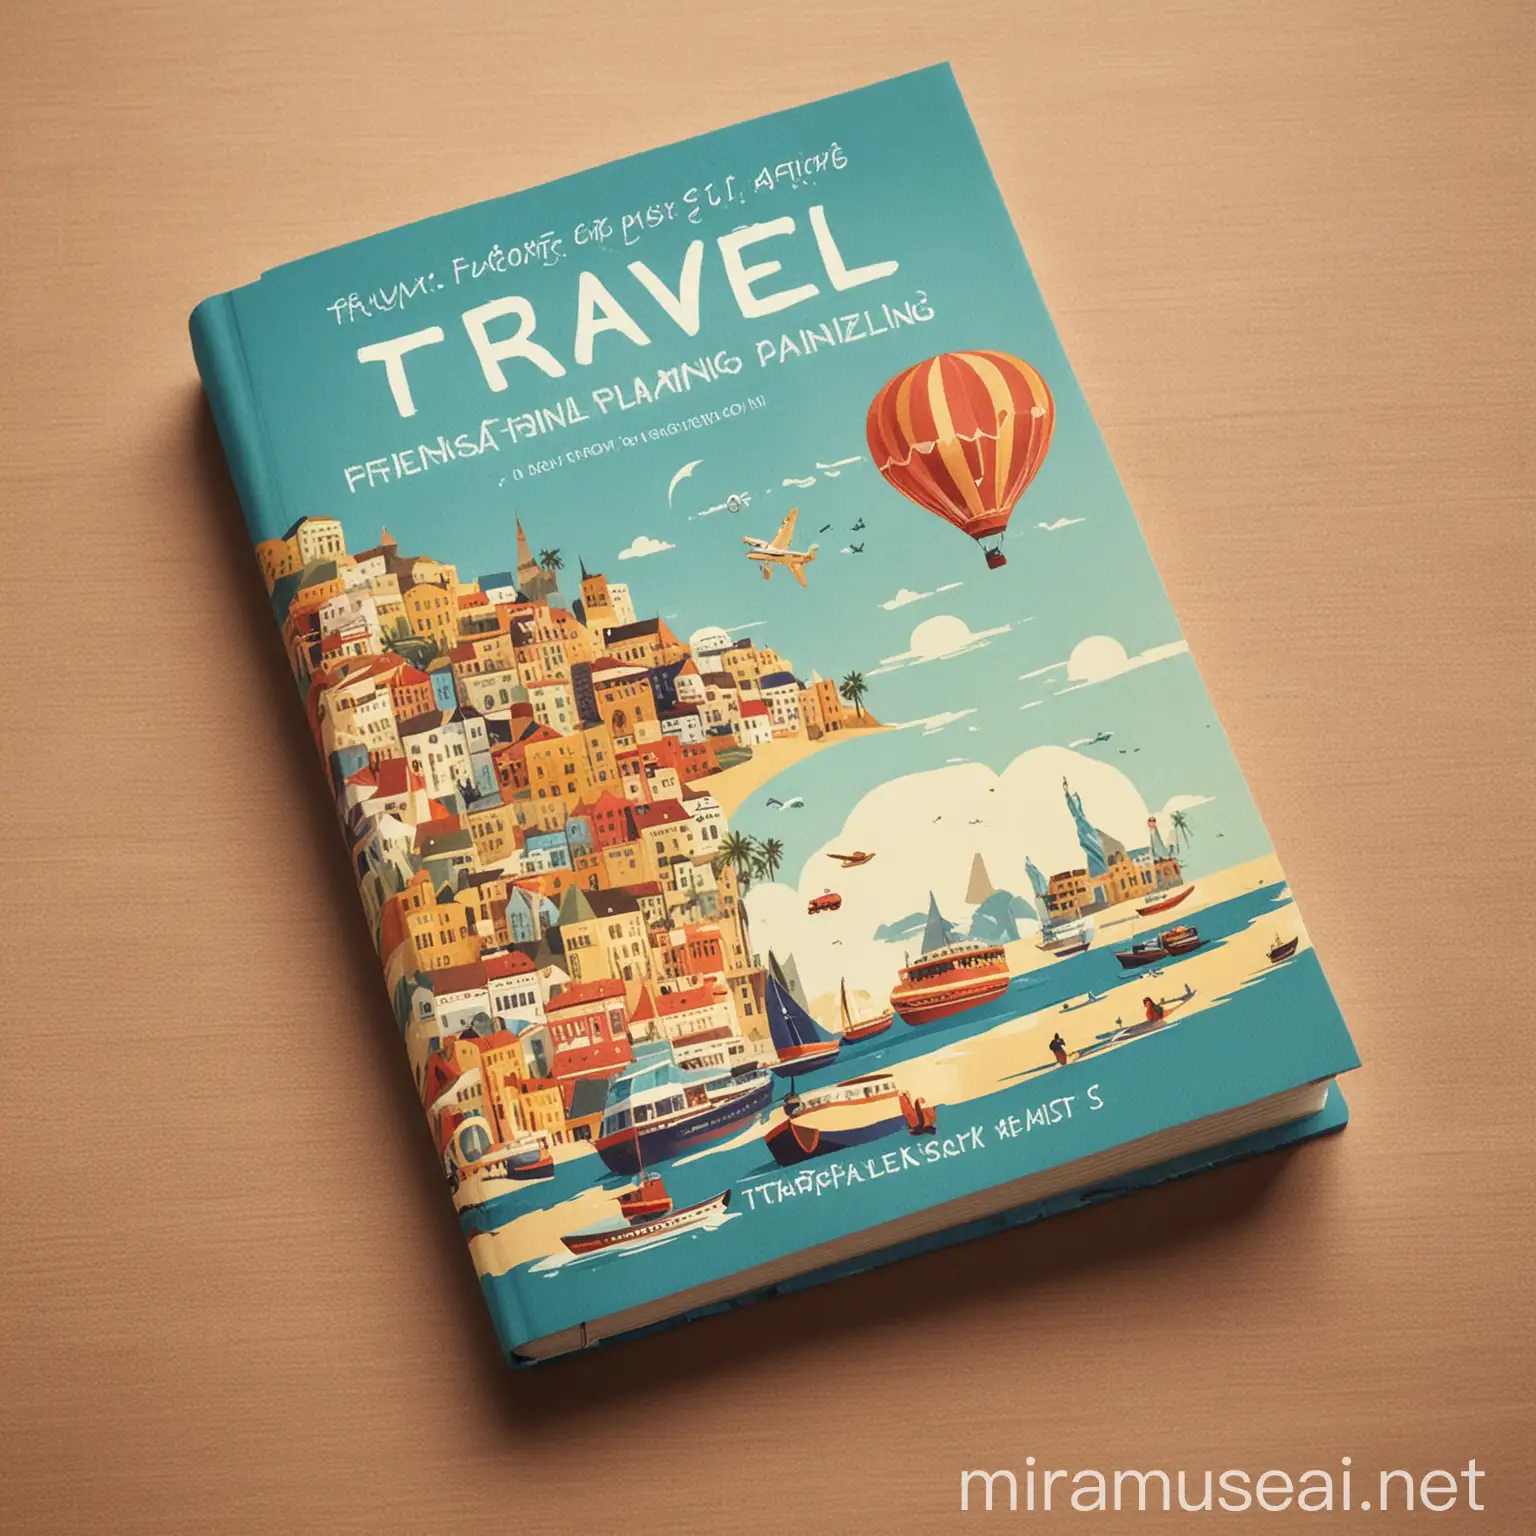 book cover on travel planning
